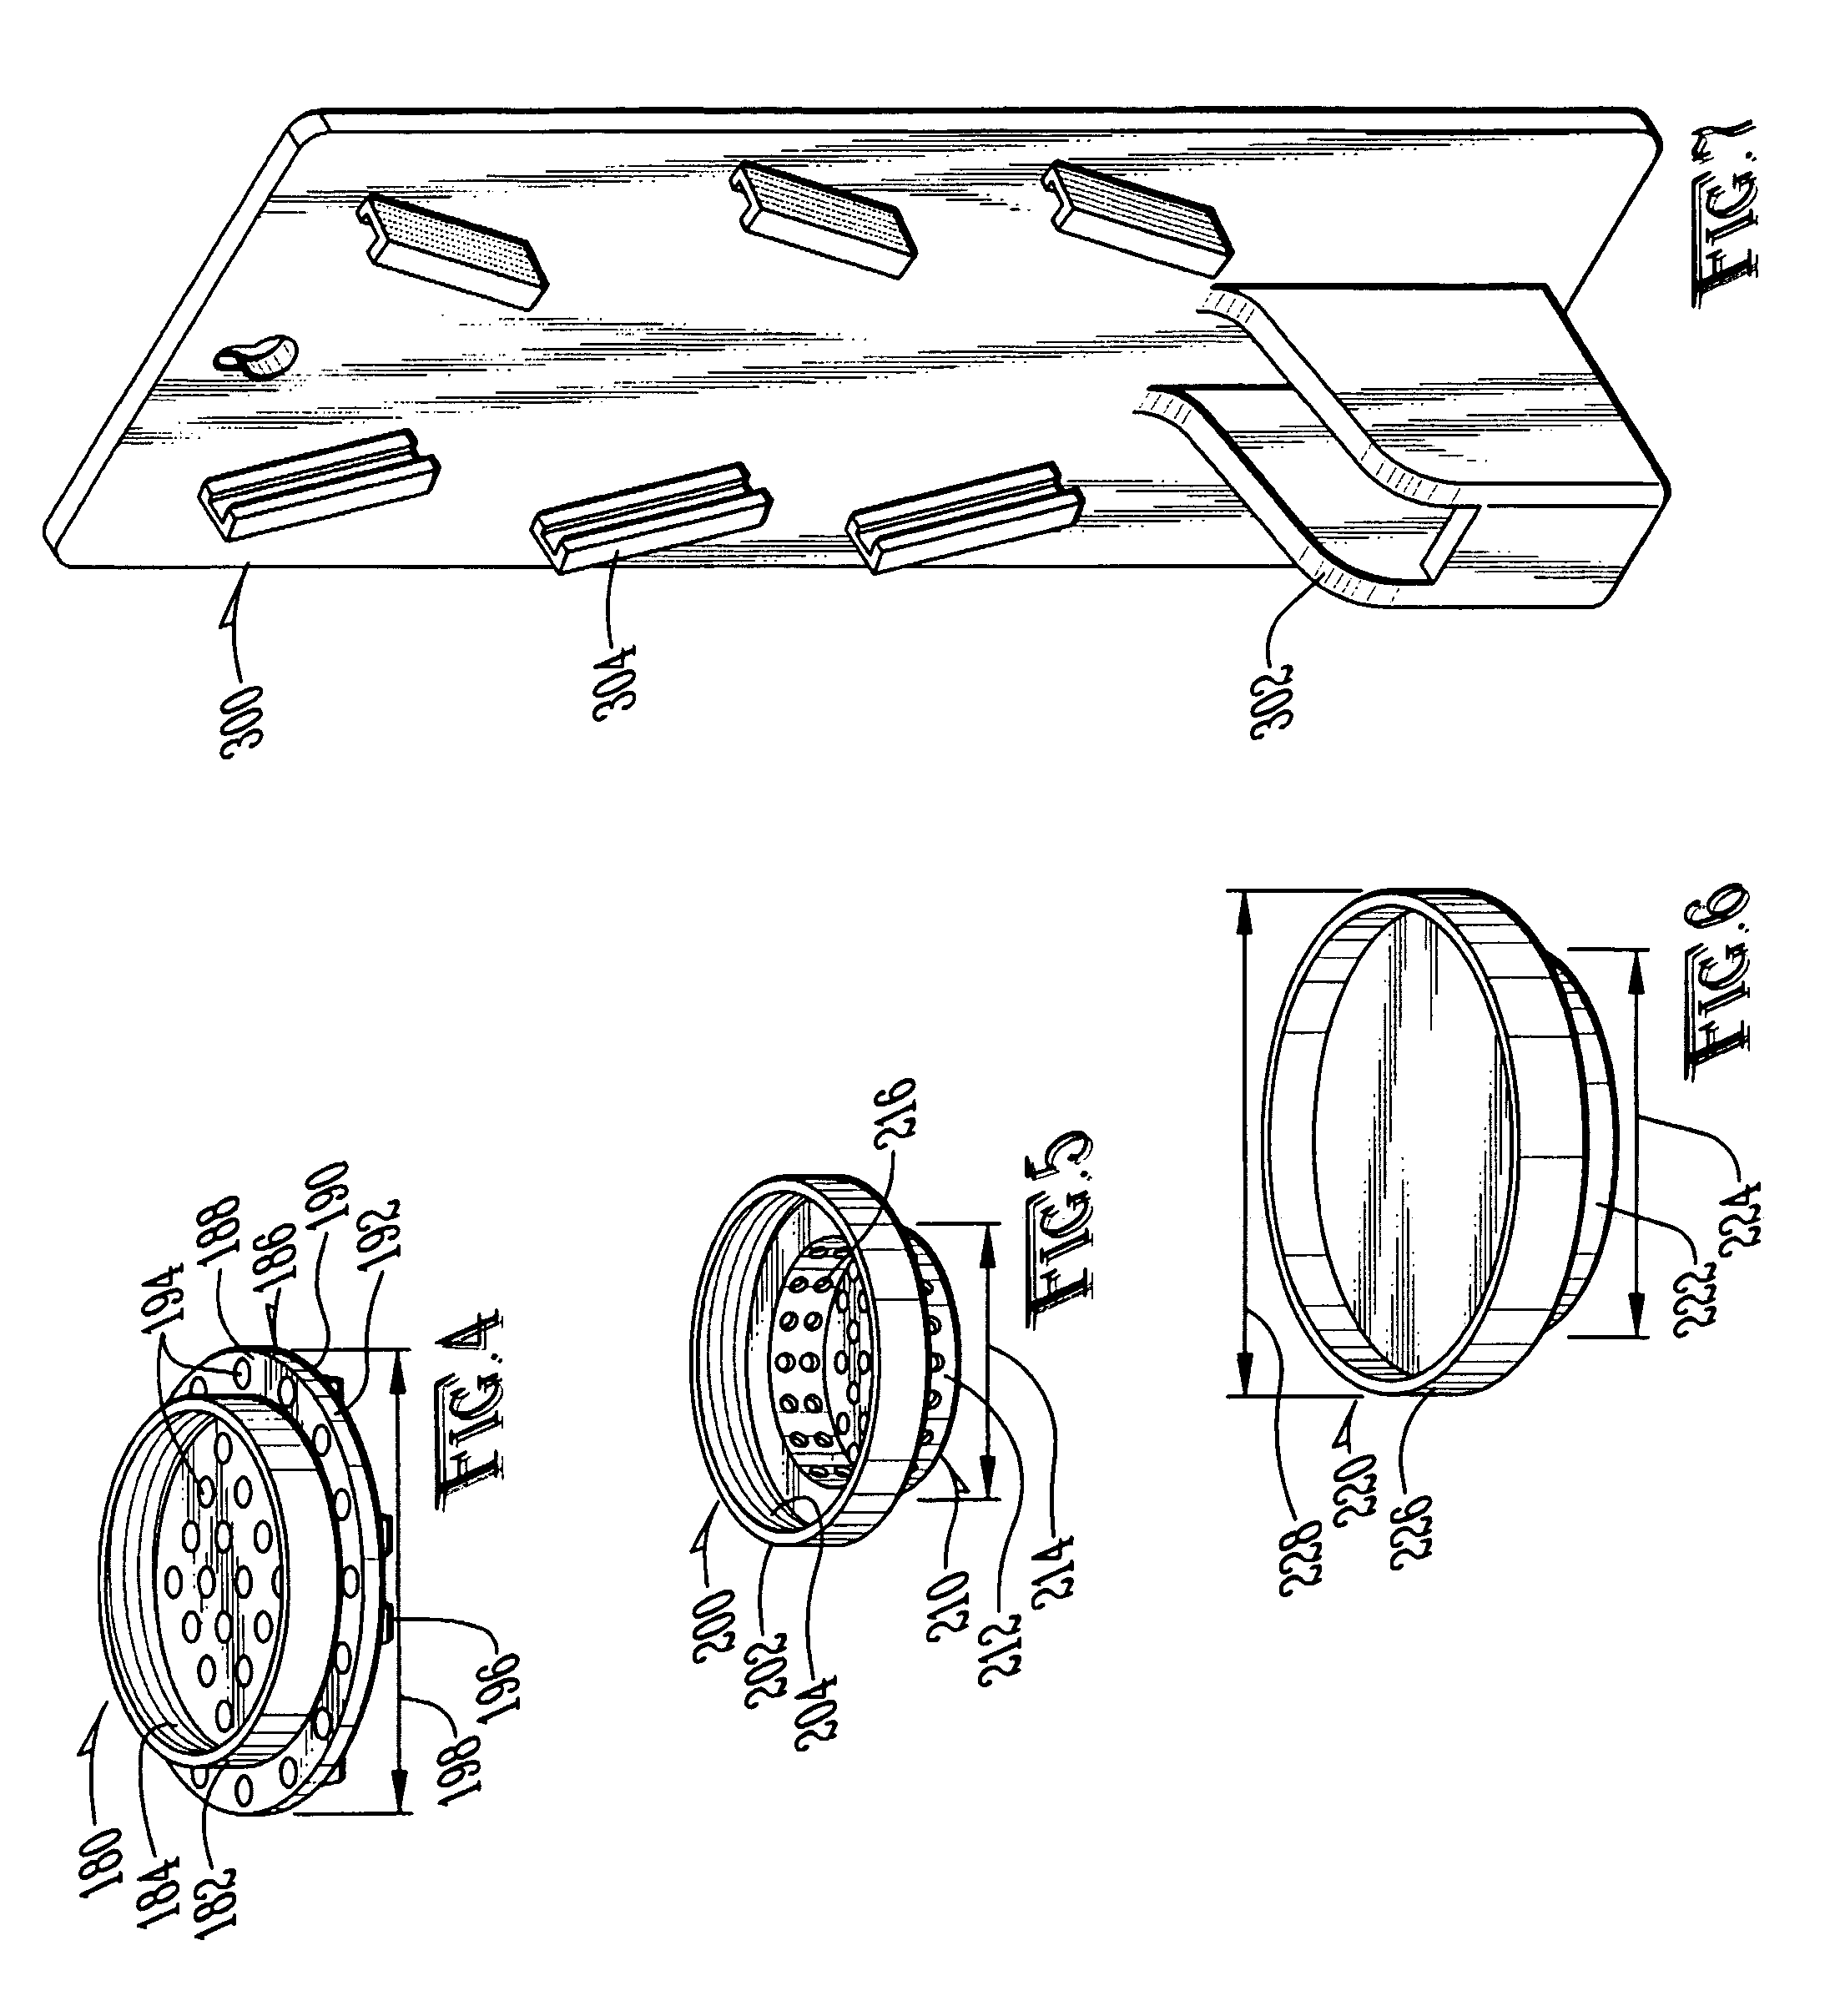 Device for squeezing fluid from a container of food packed in fluid